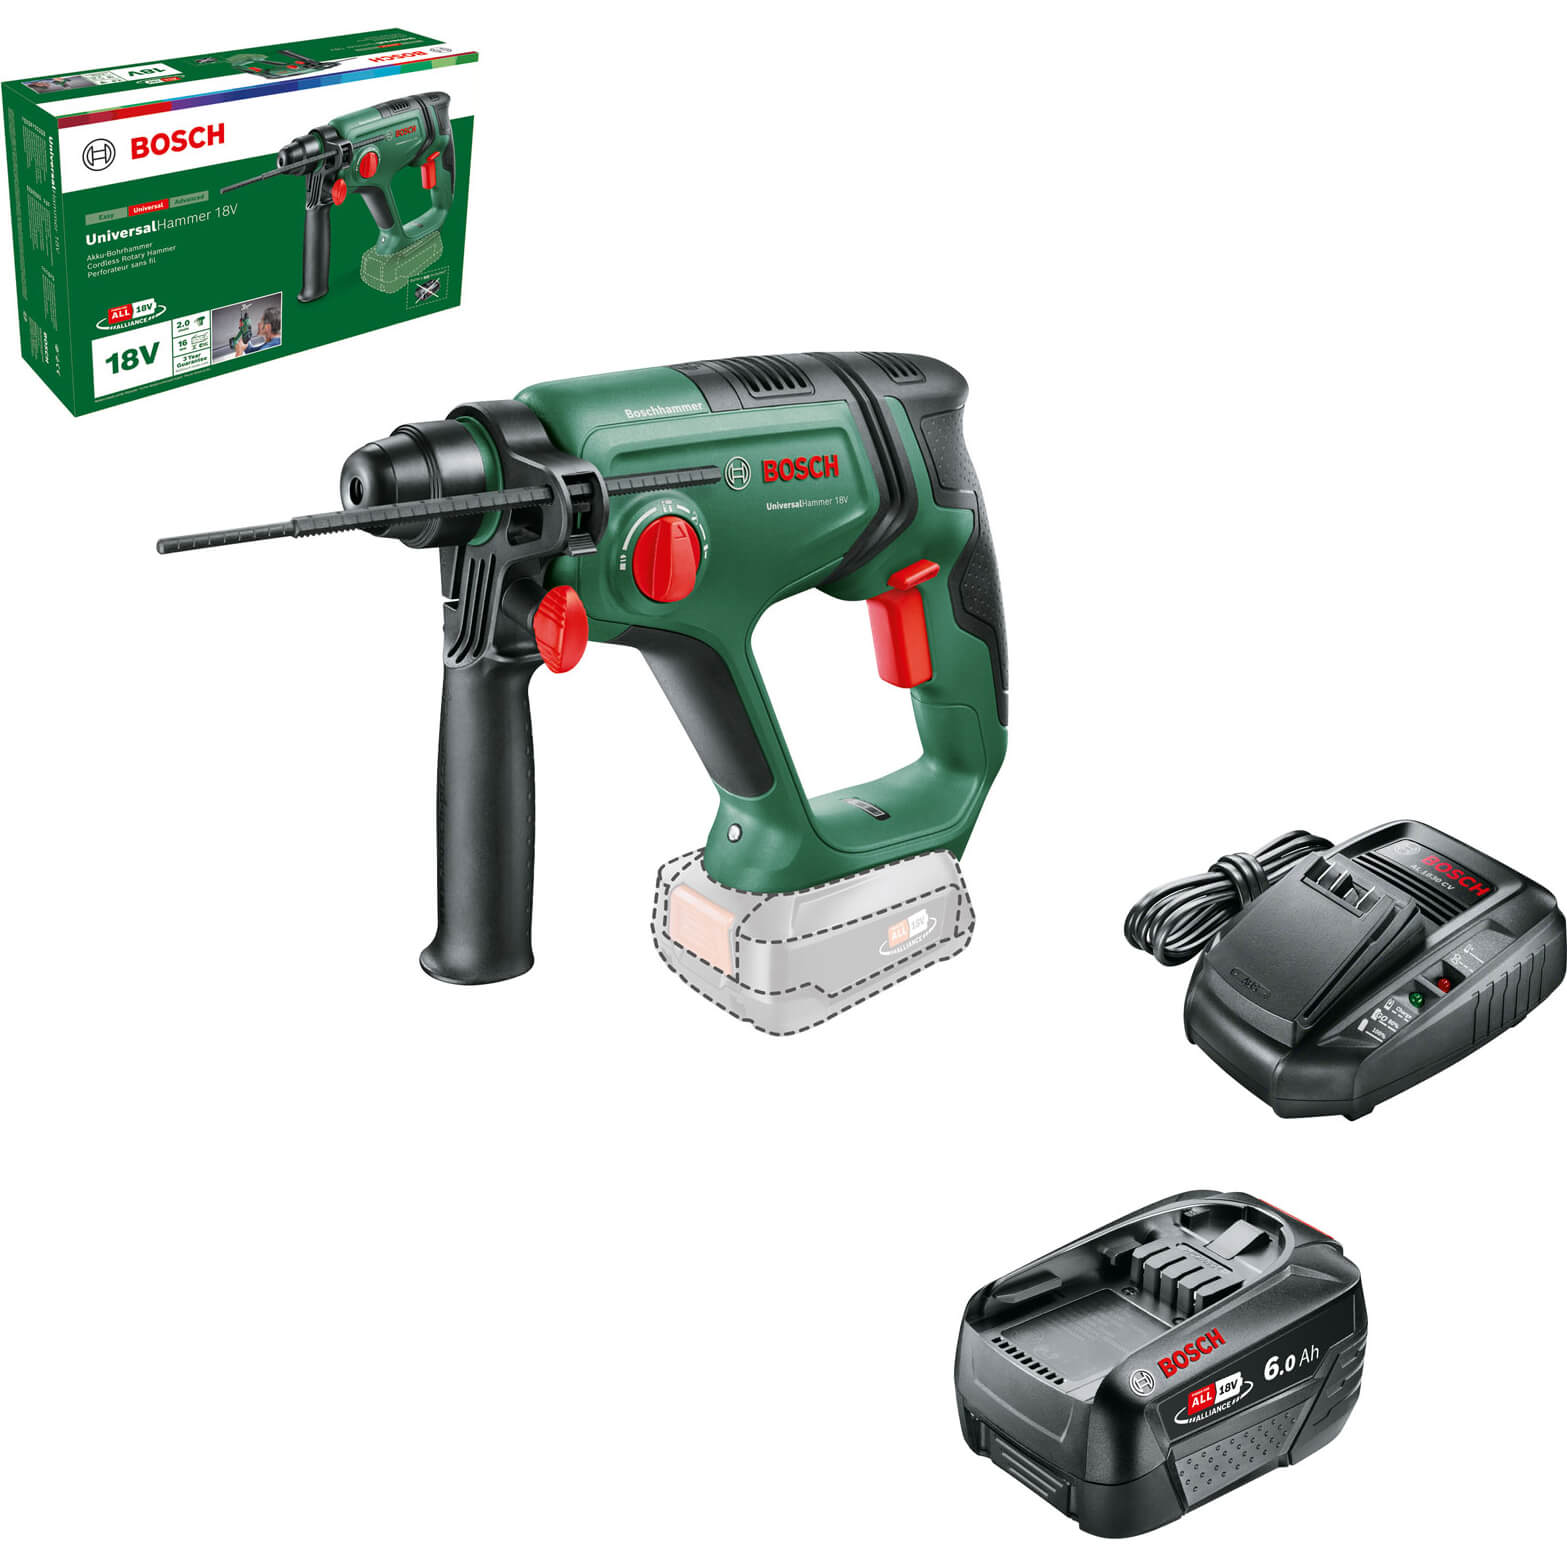 Image of Bosch UNIVERSALHAMMER 18v Cordless SDS Drill 1 x 6ah Li-ion Charger No Case